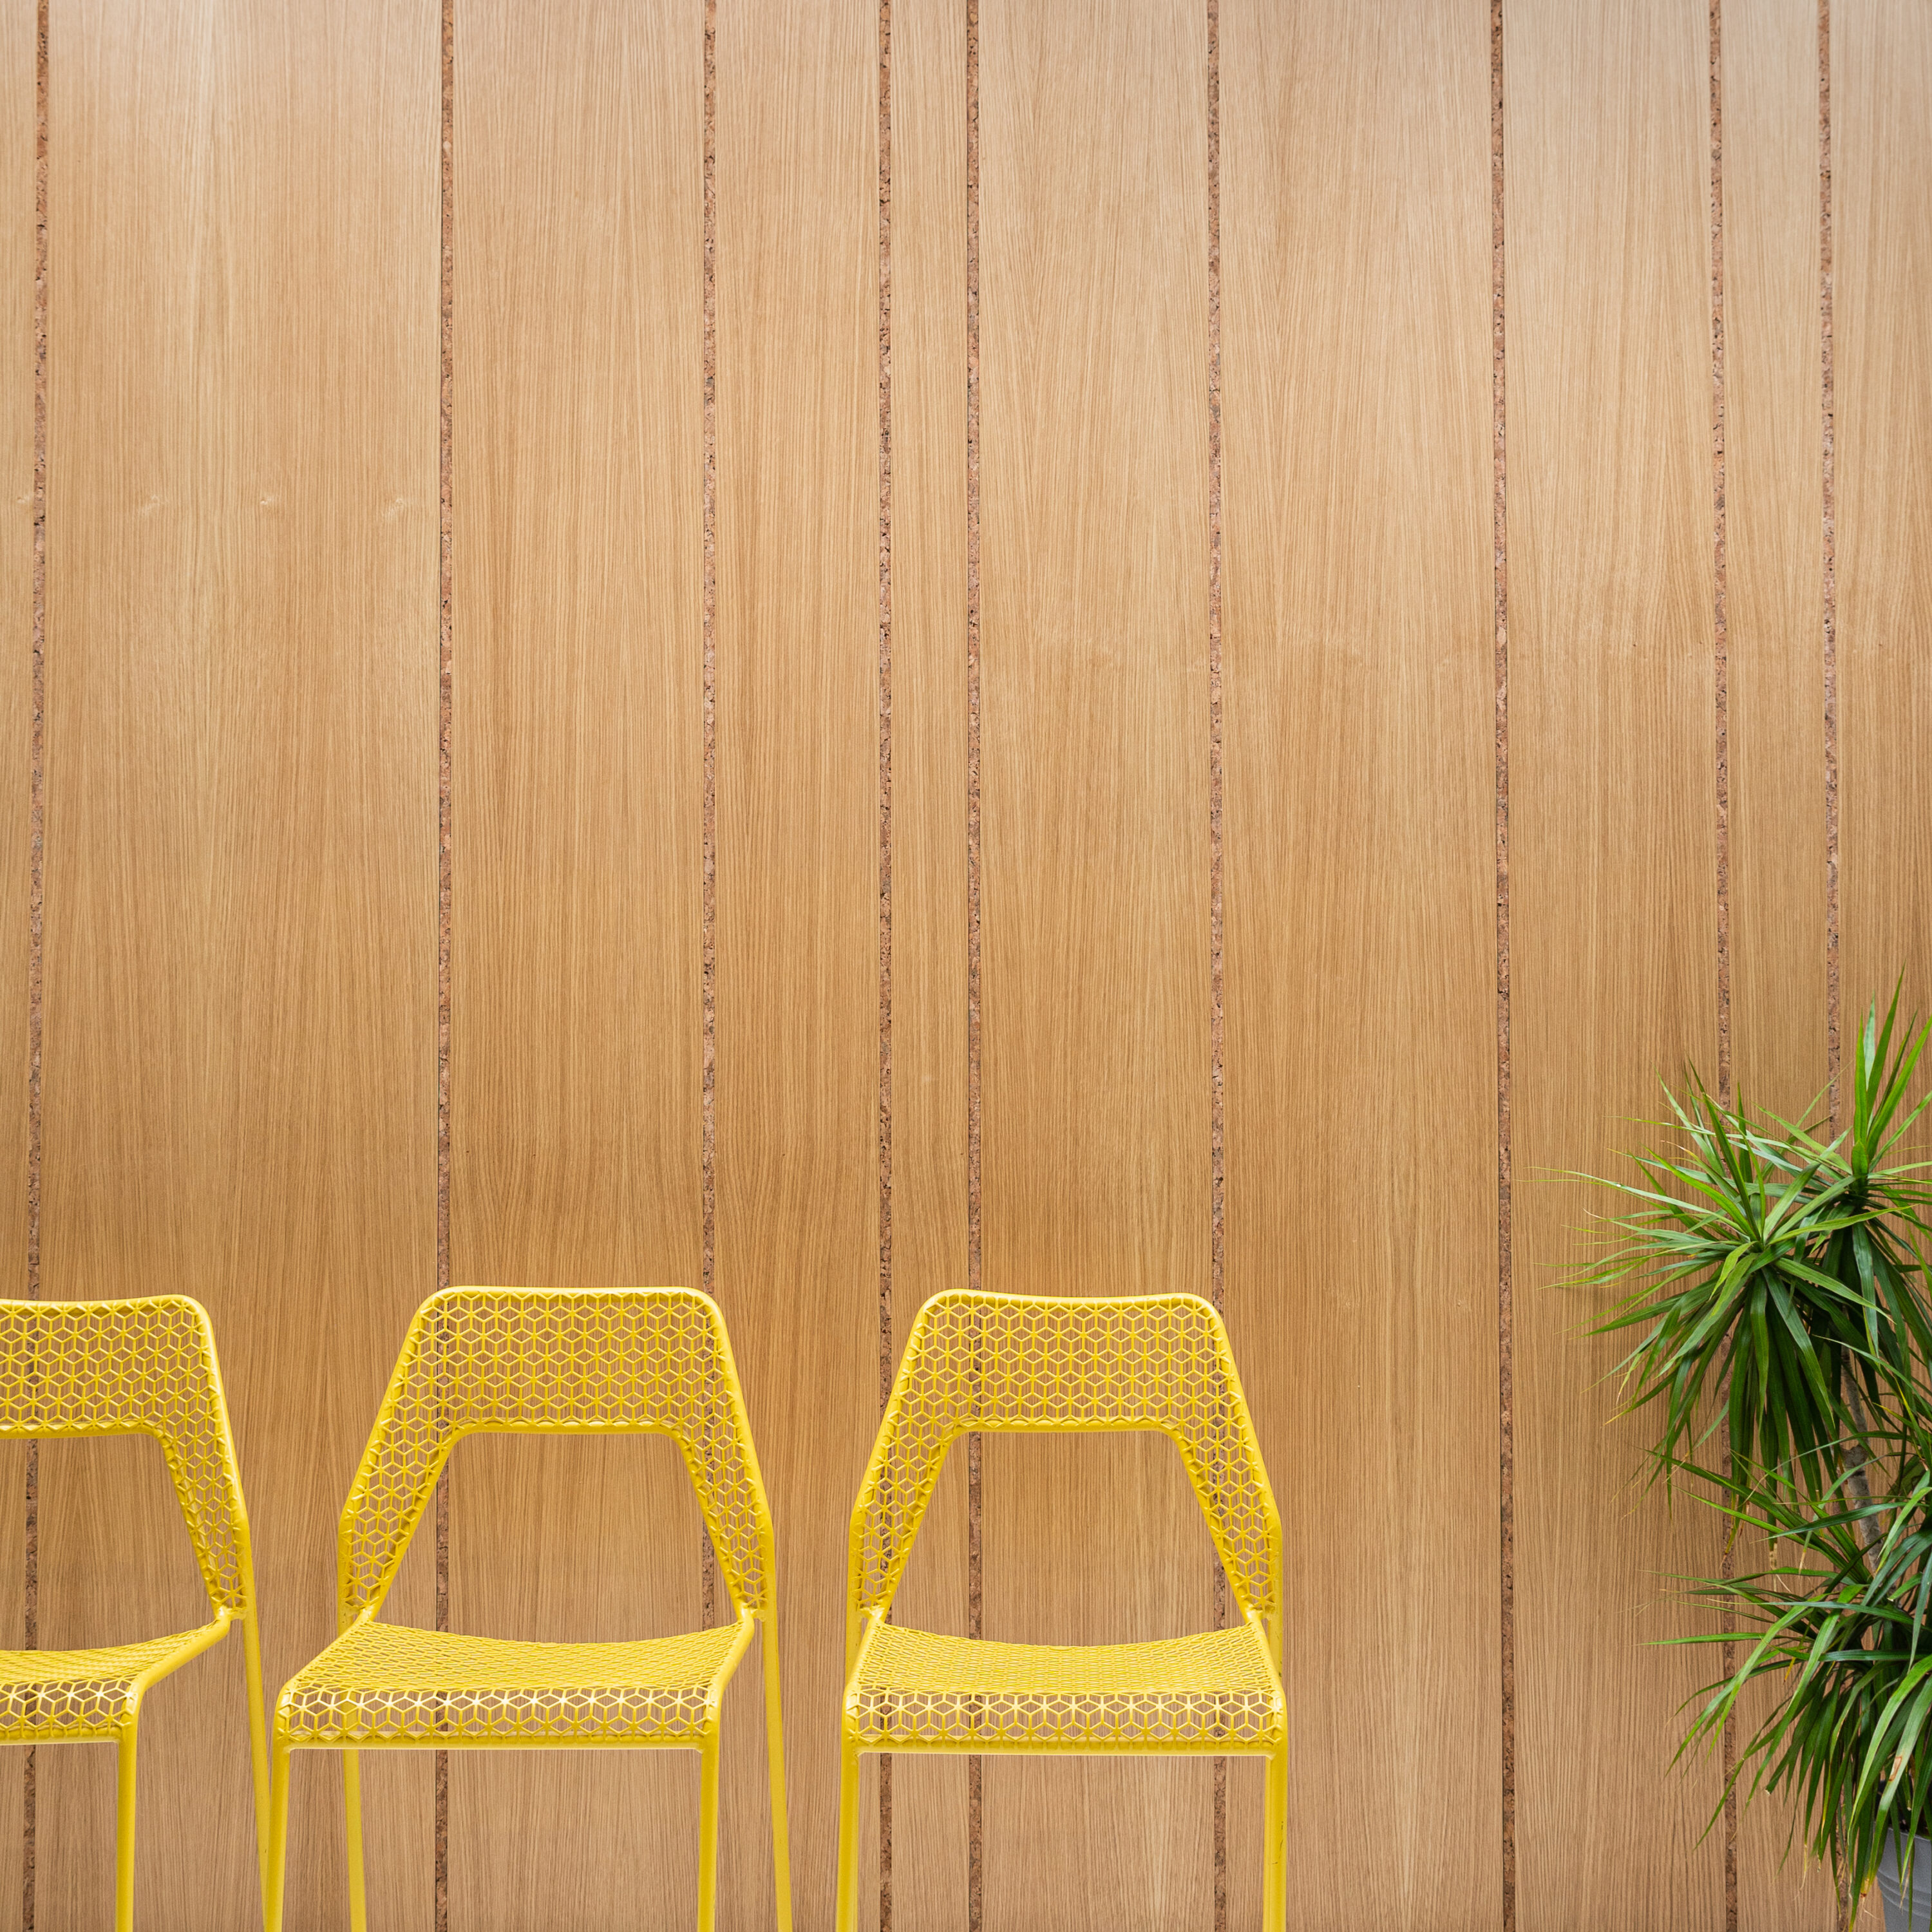 An oak wood wall with long vertical lines of inlaid cork. In front of the wall are three yellow Blu Dot wire chairs and a spiky palm plant.